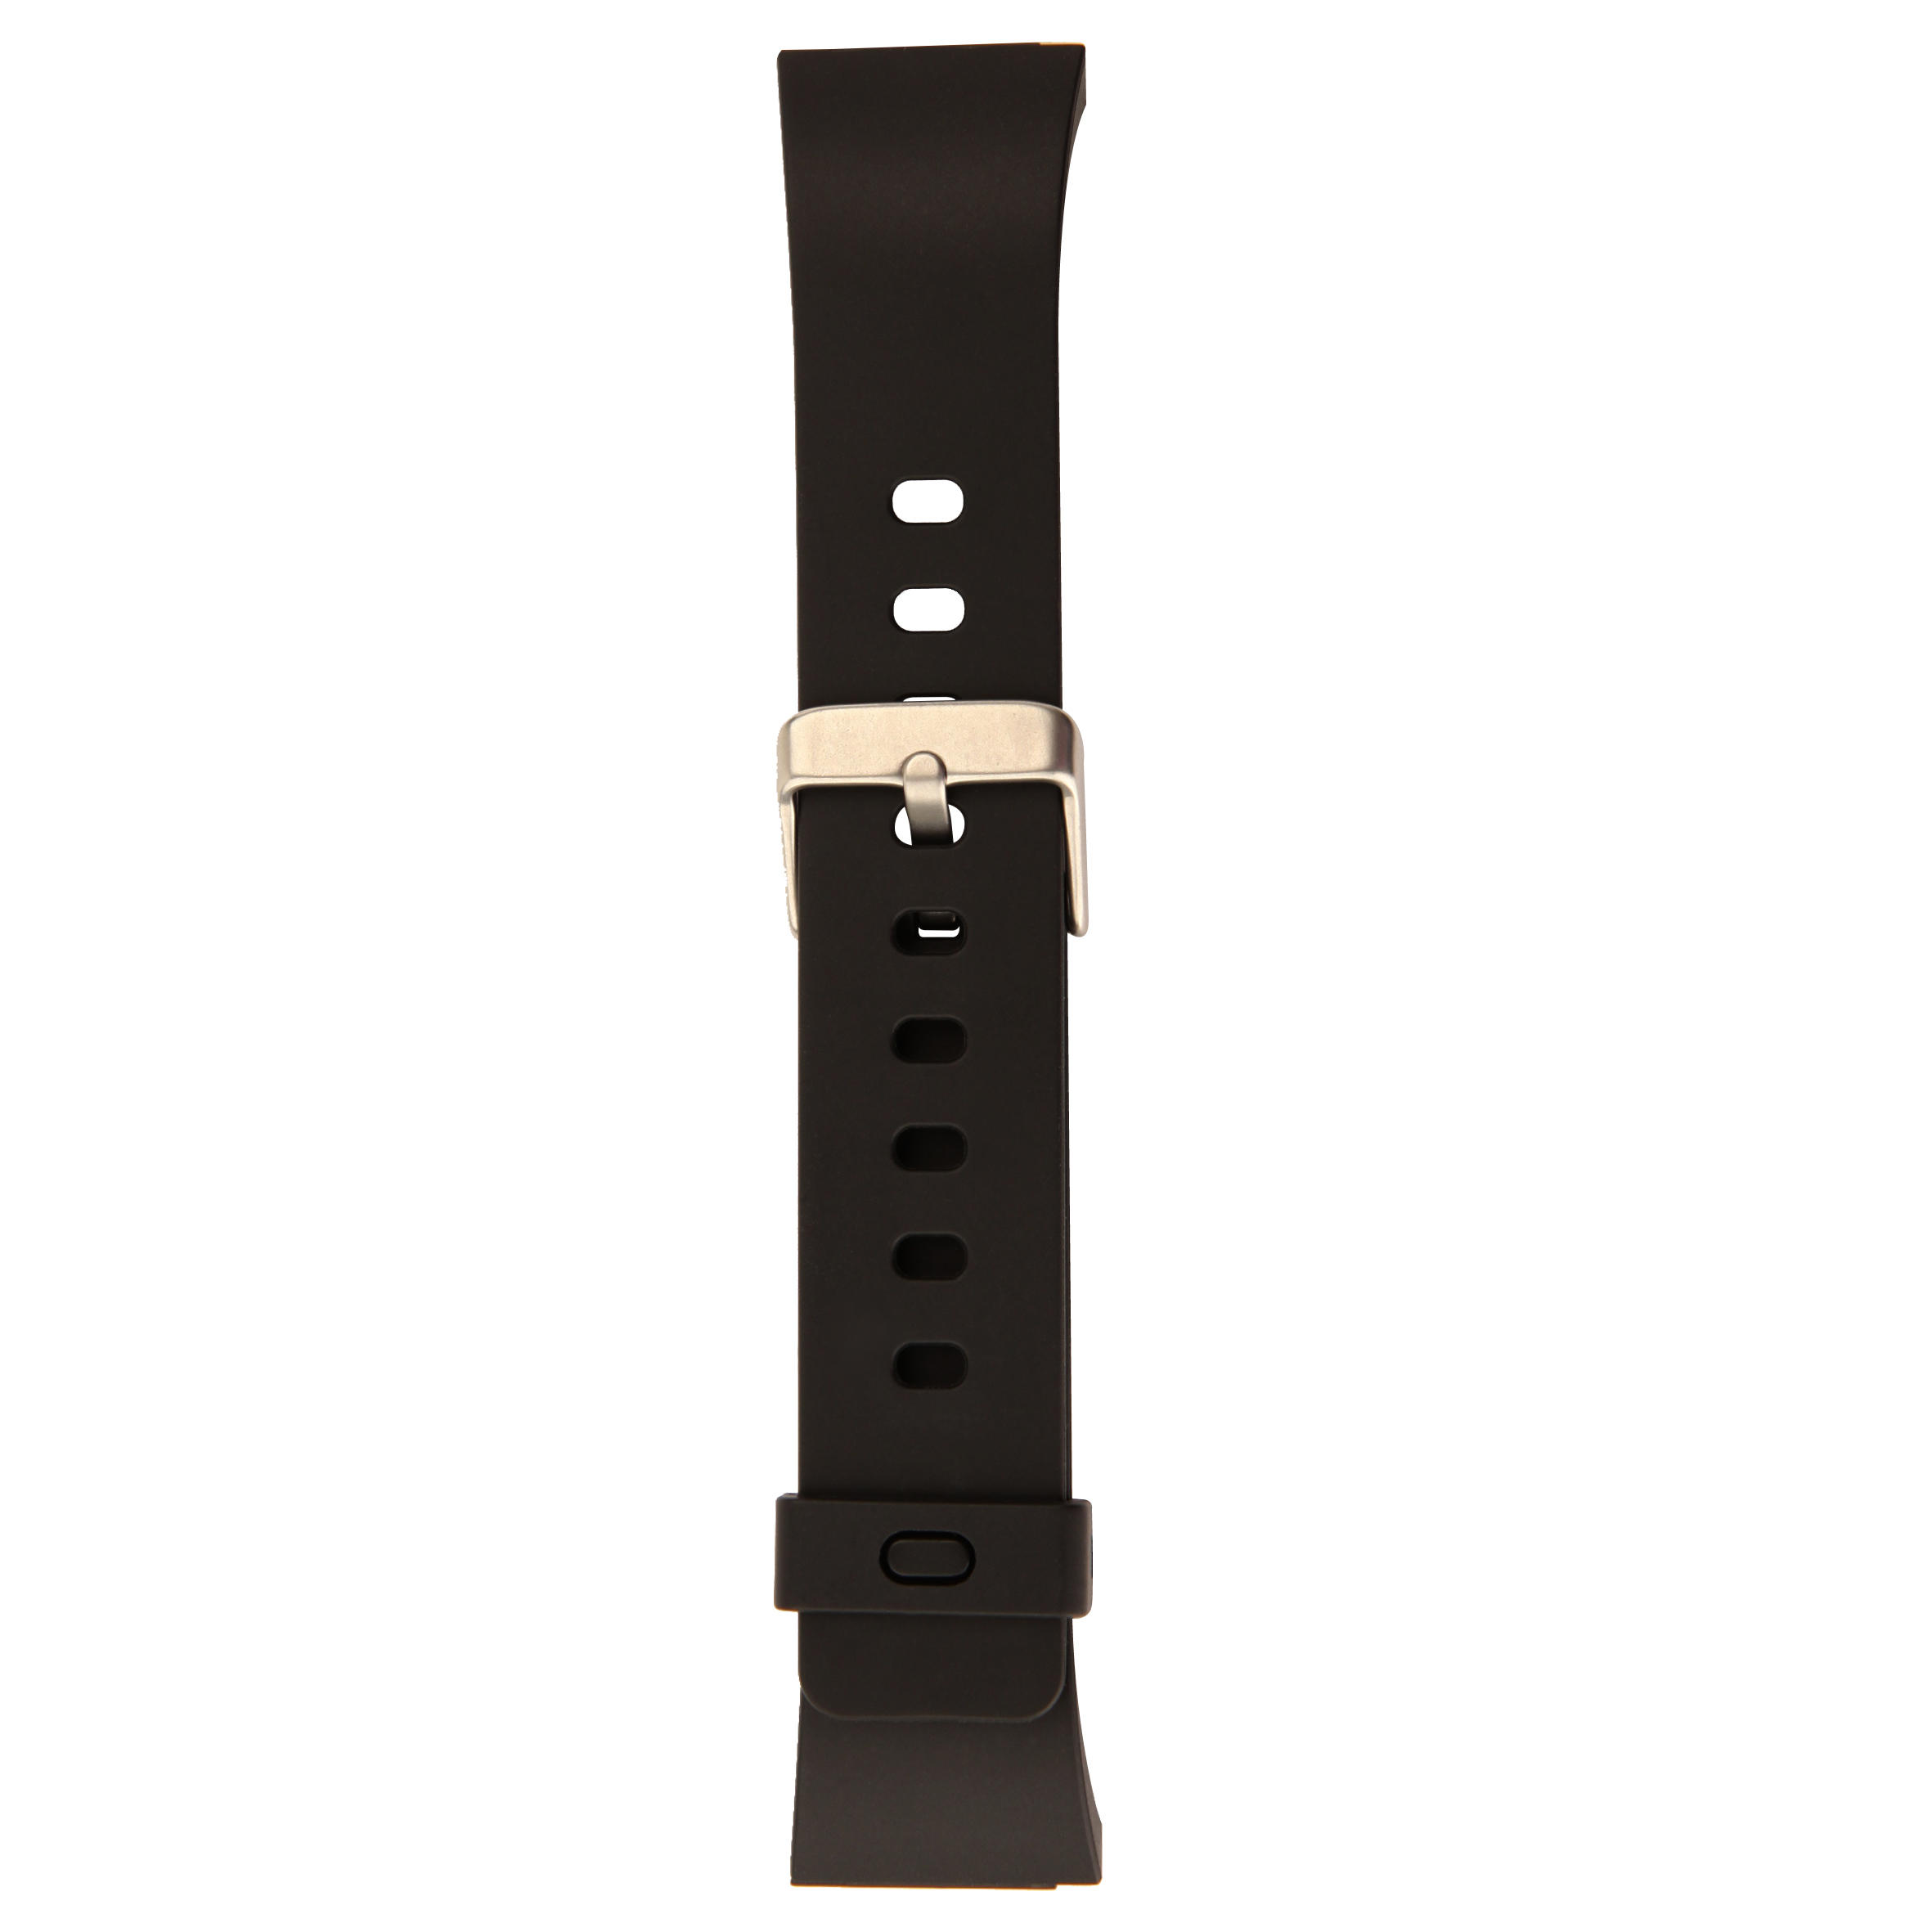 All sports WATCH STRAP COMPATIBLE W500 